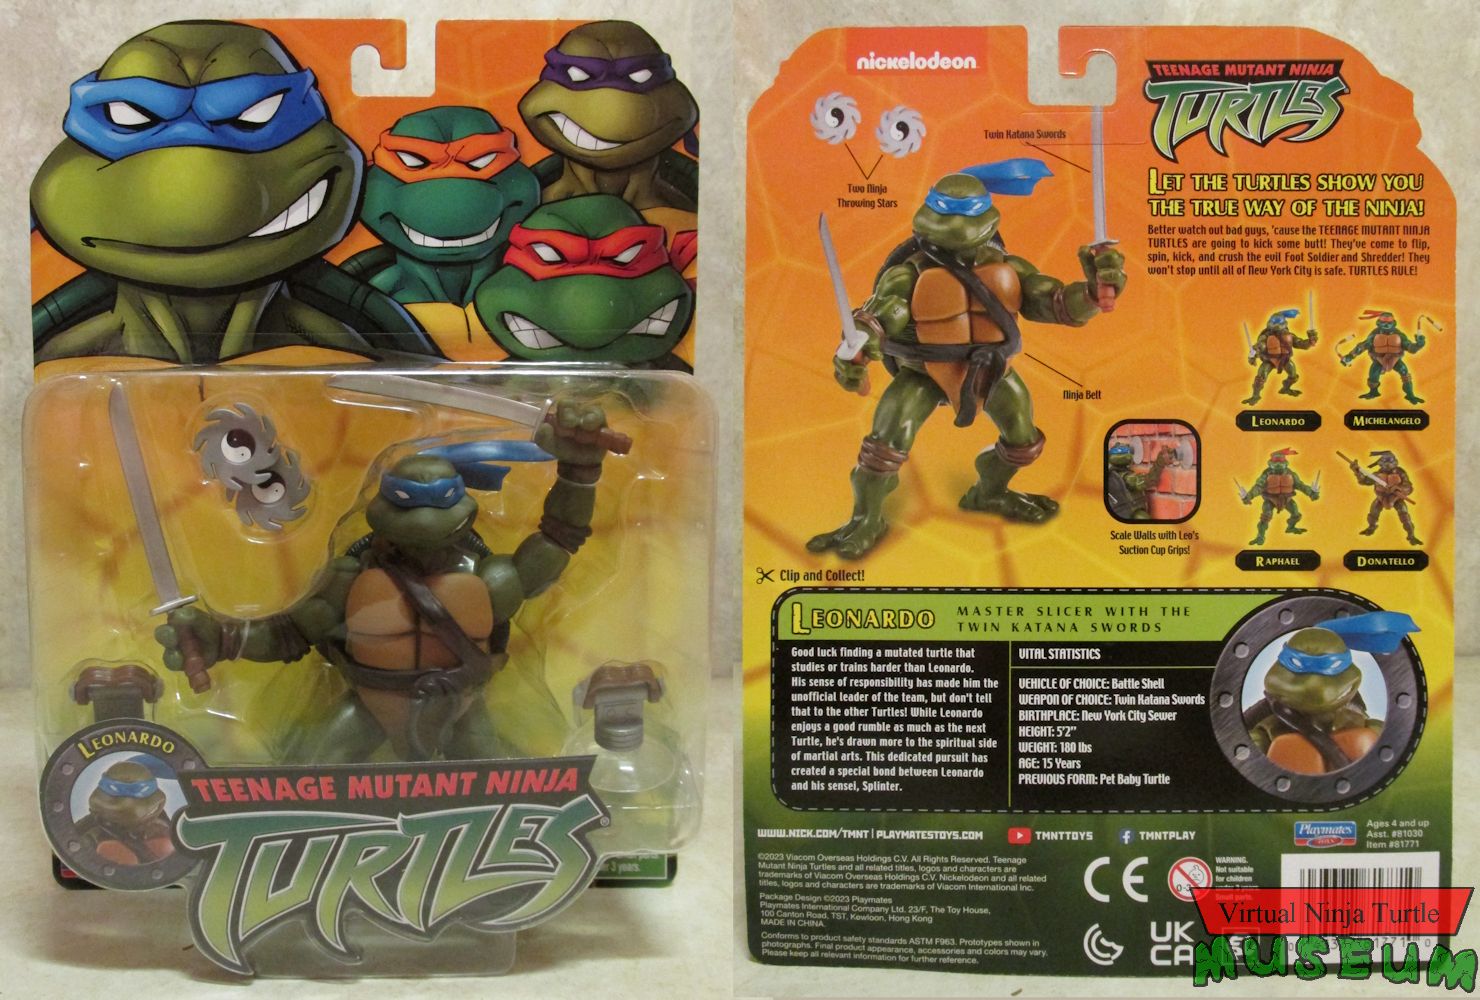 2023 reissue card front and back